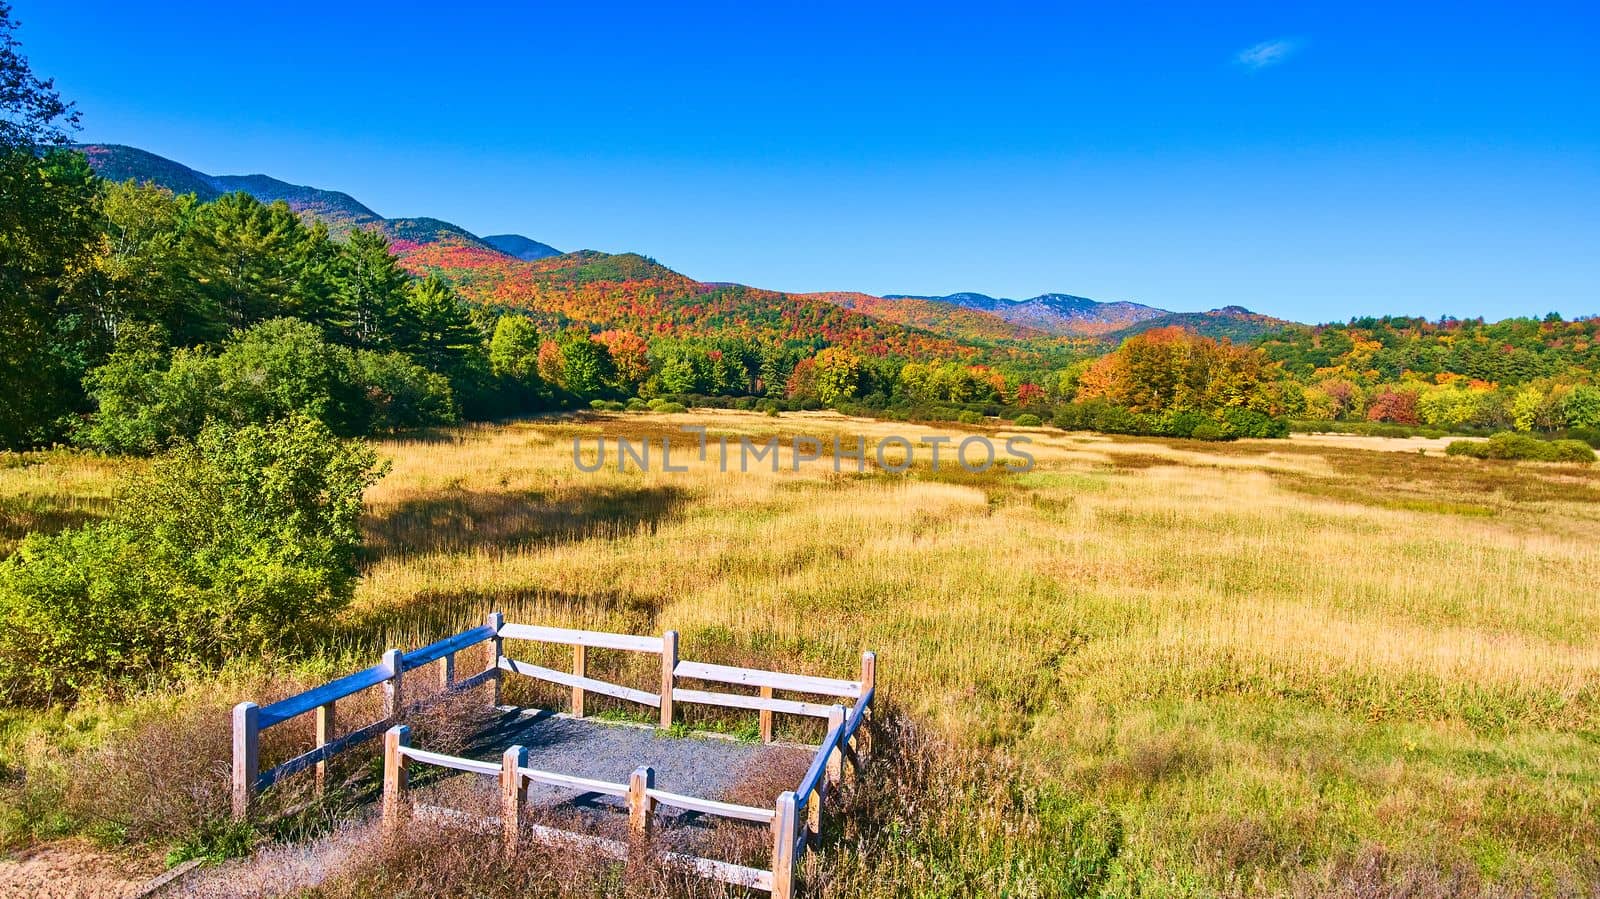 View stunning fields and colorful mountains from small fenced platform by njproductions